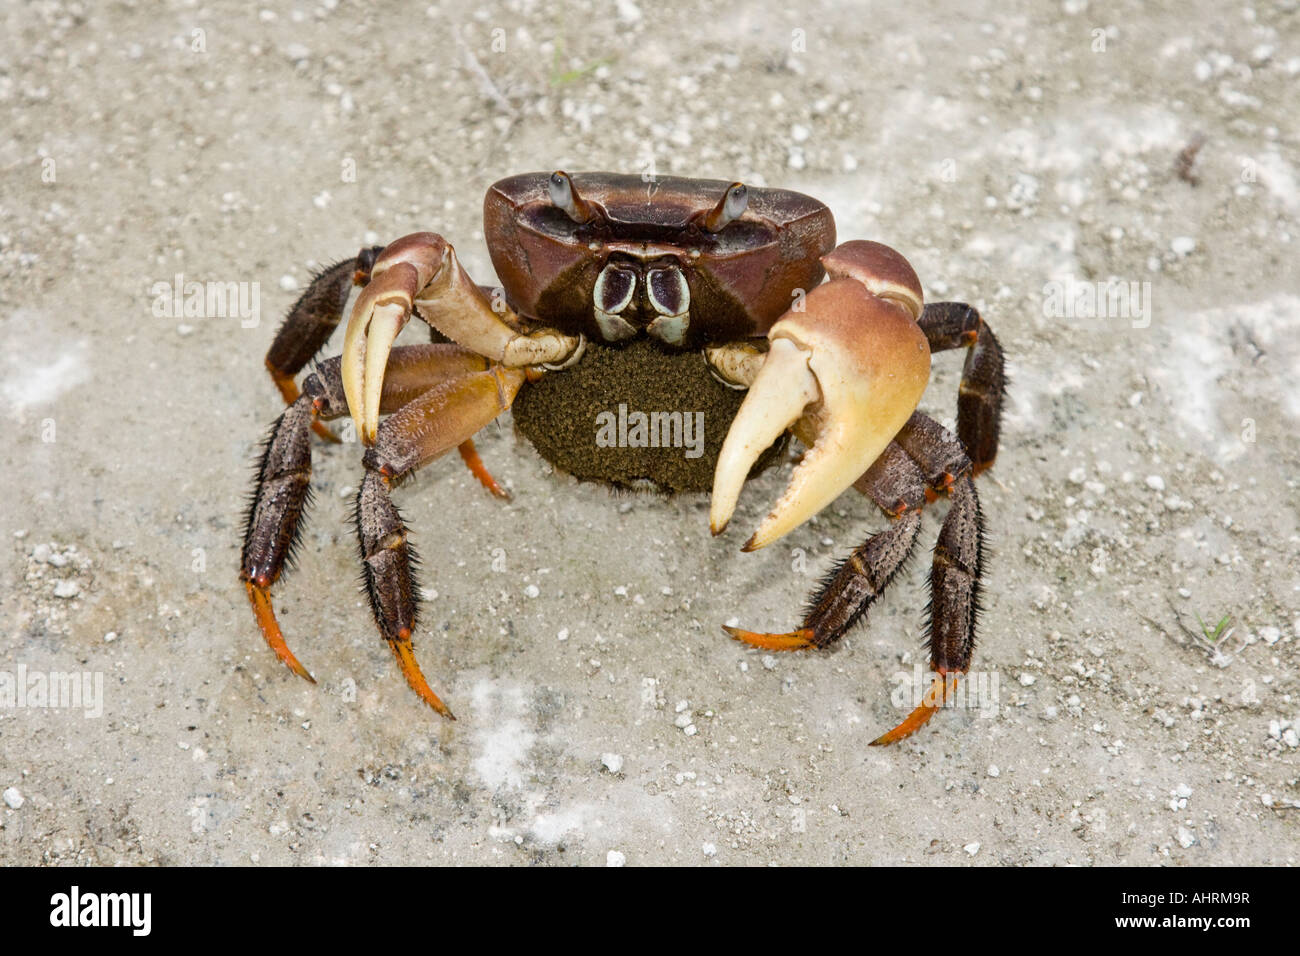 Crab on WWII Runway Live Crabs are found everywhere in Peleliu Republic of Palau Stock Photo